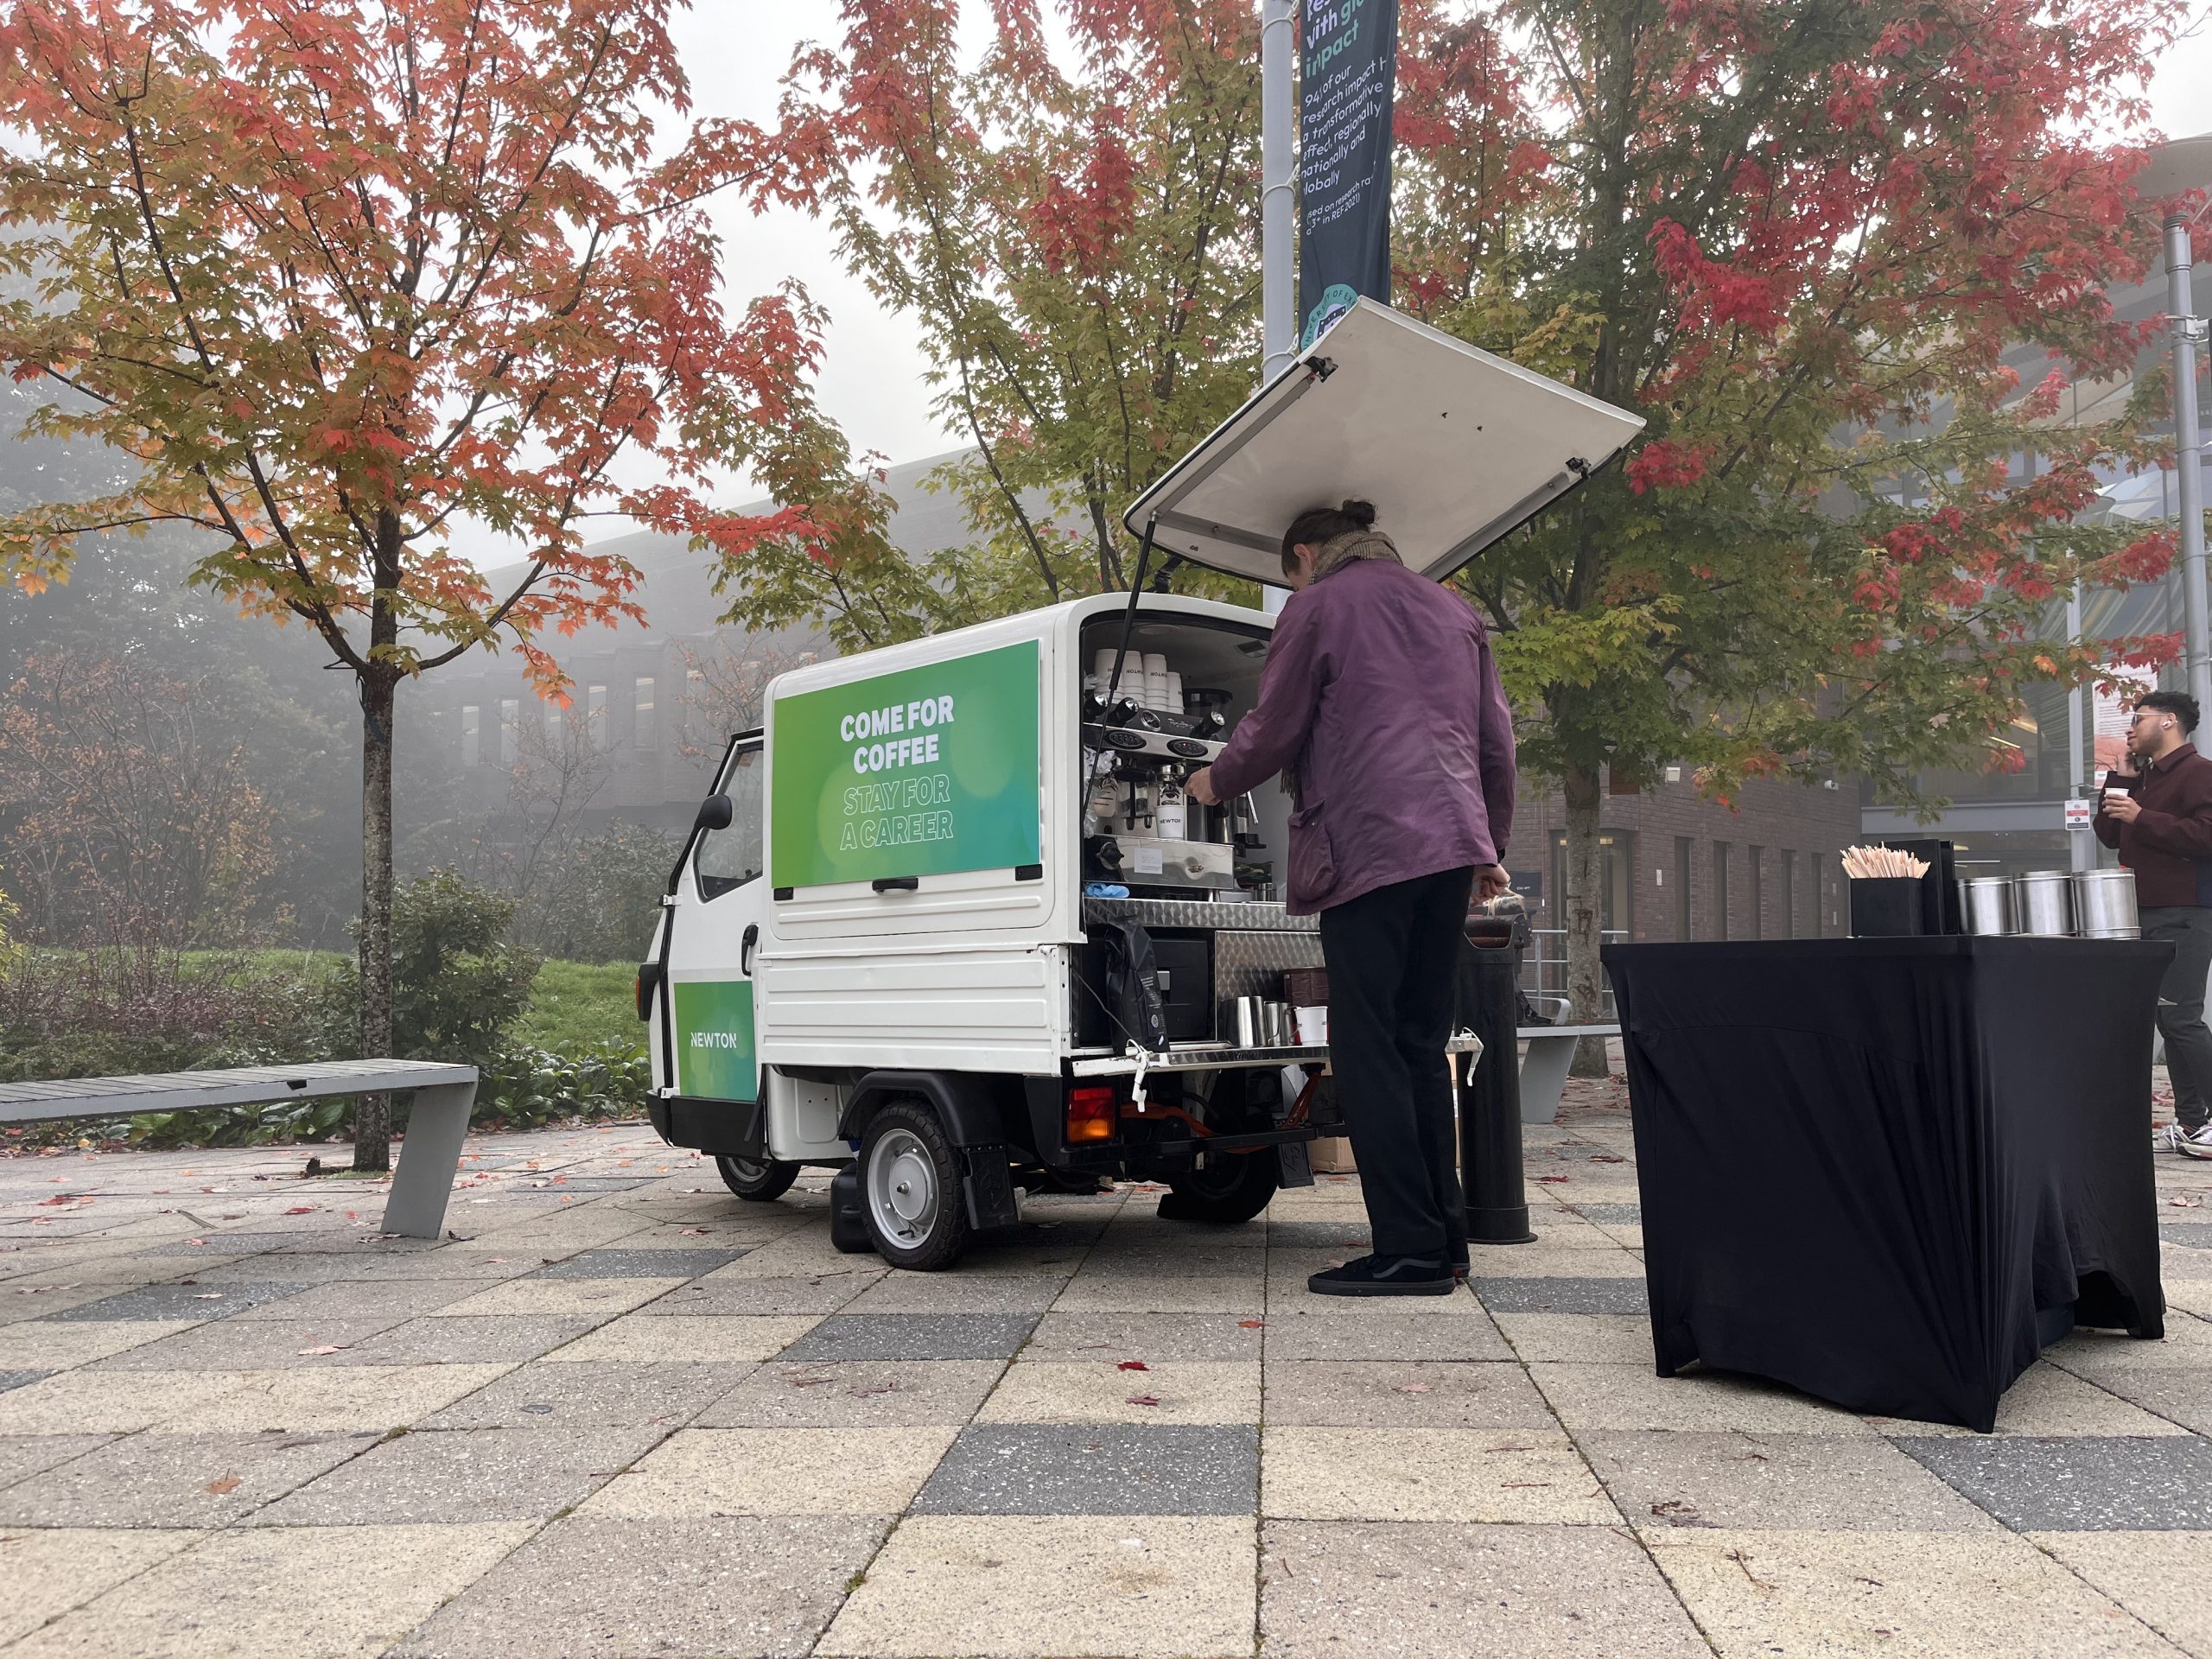 Photos of our branded mobile coffee van at a careers fair